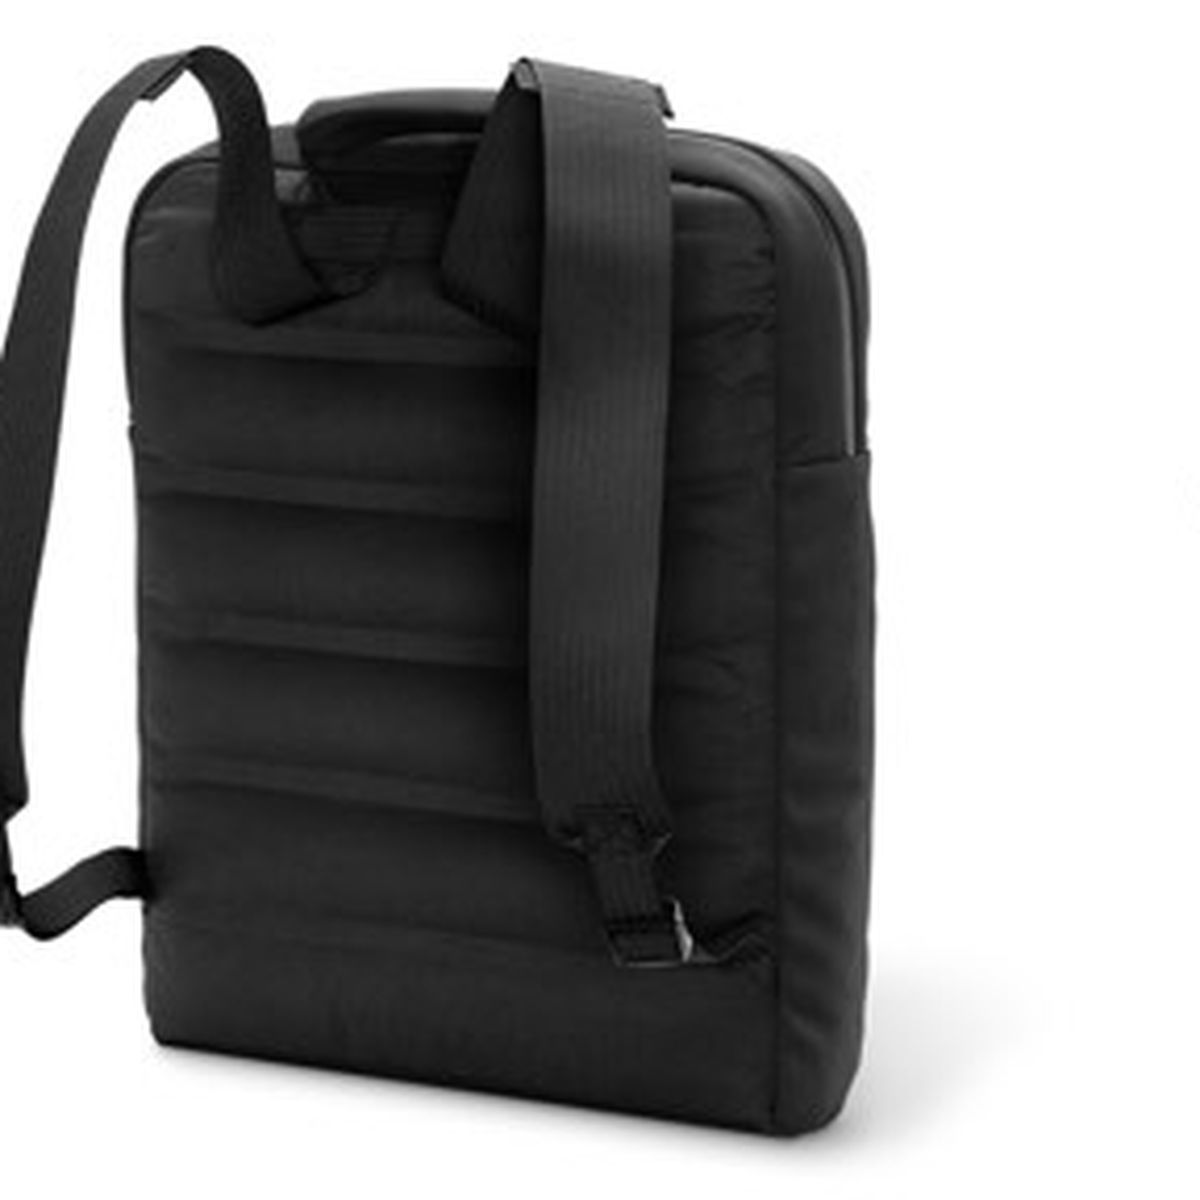 Apple Store Gains Exclusive Accessories From Cycling Brand Rapha 